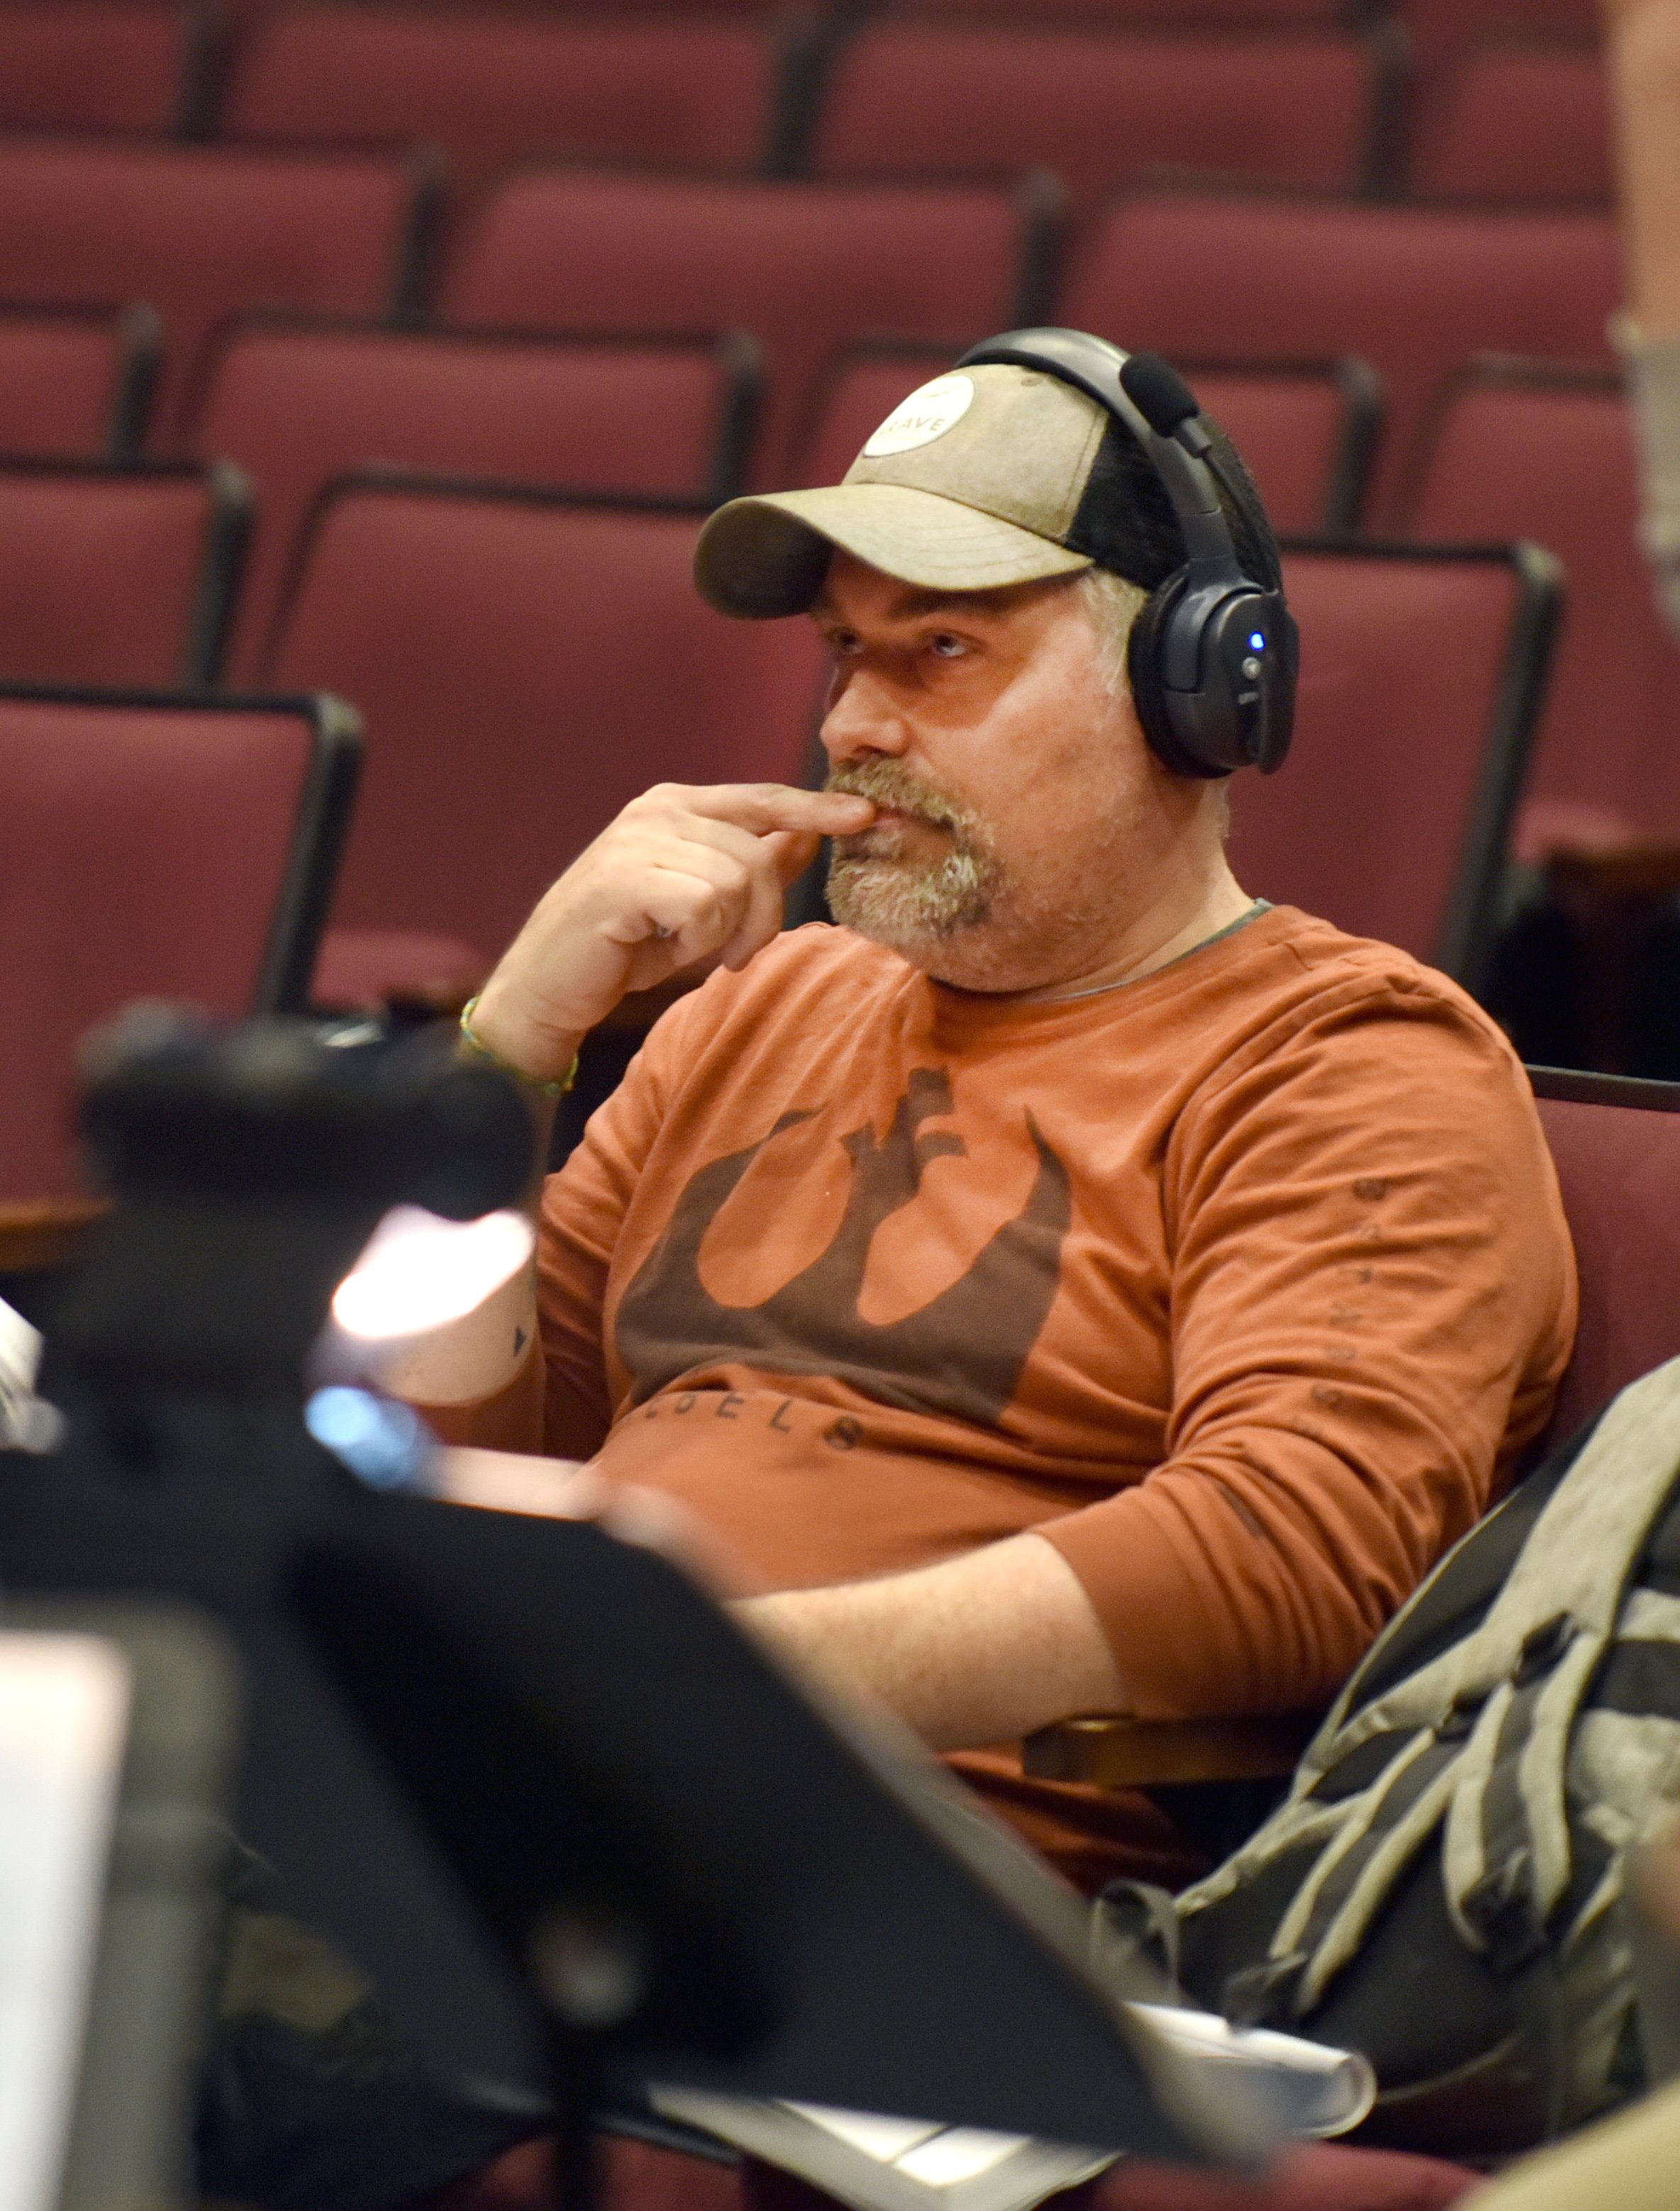   Director Scott Weigand watches as the action unfolds on stage. Photo by Gordon Miller  